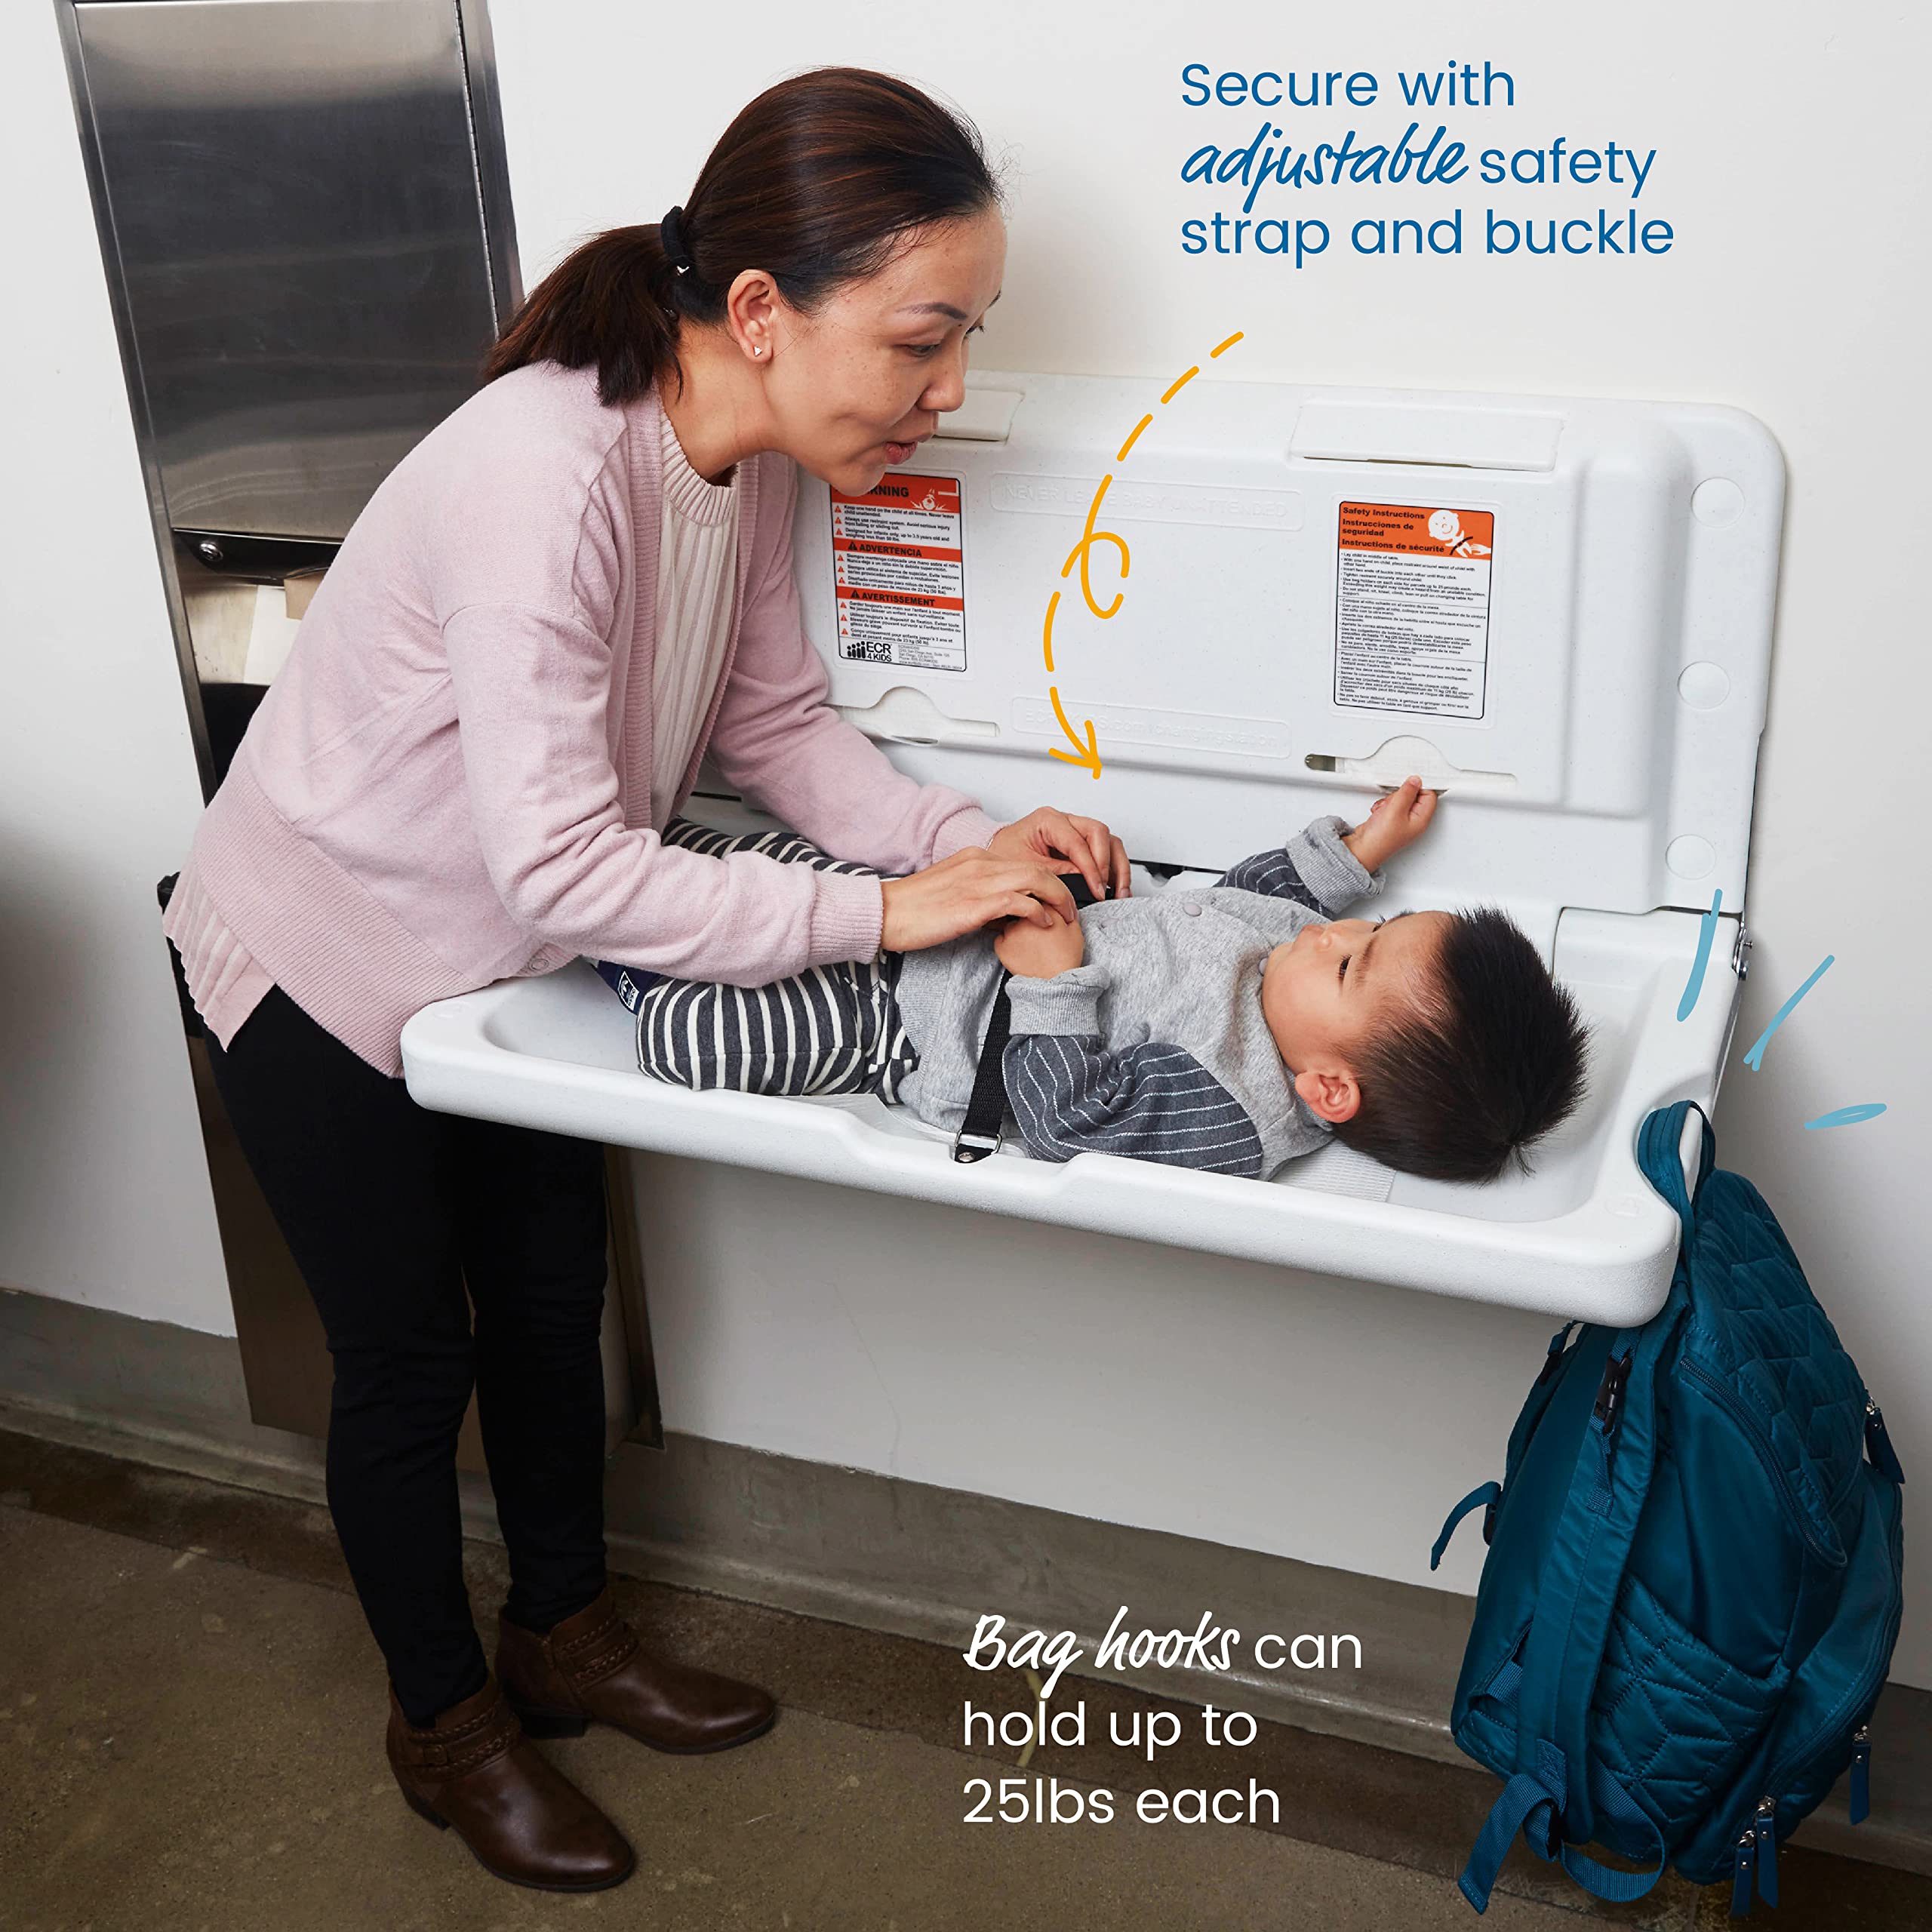 ECR4Kids ELR-18004 Wall-Mounted Baby Changing Station, Horizontal Fold-Down Diaper Change Table with Safety Straps for Commercial Bathrooms, ADA and ANSI Compliant, Free Replacement Straps, White Granite